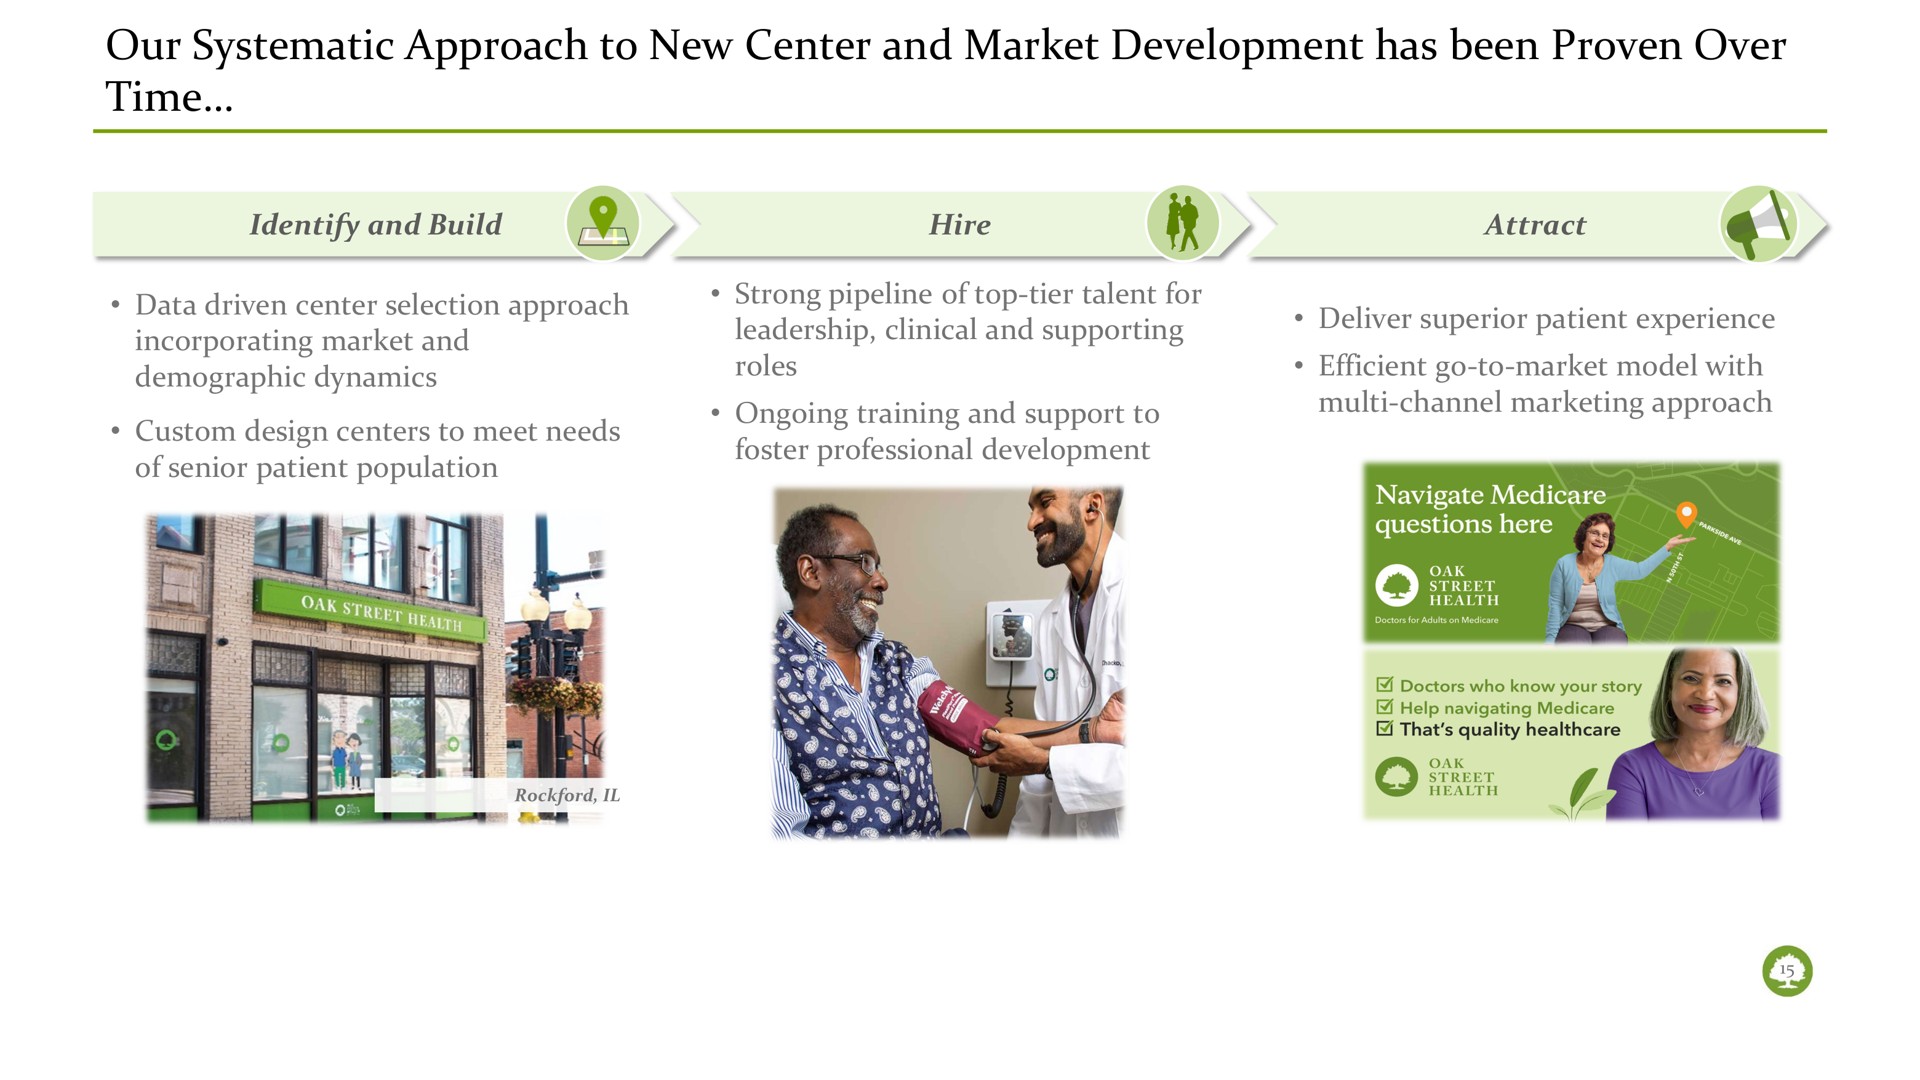 our systematic approach to new center and market development has been proven over time identify build hire attract | Oak Street Health